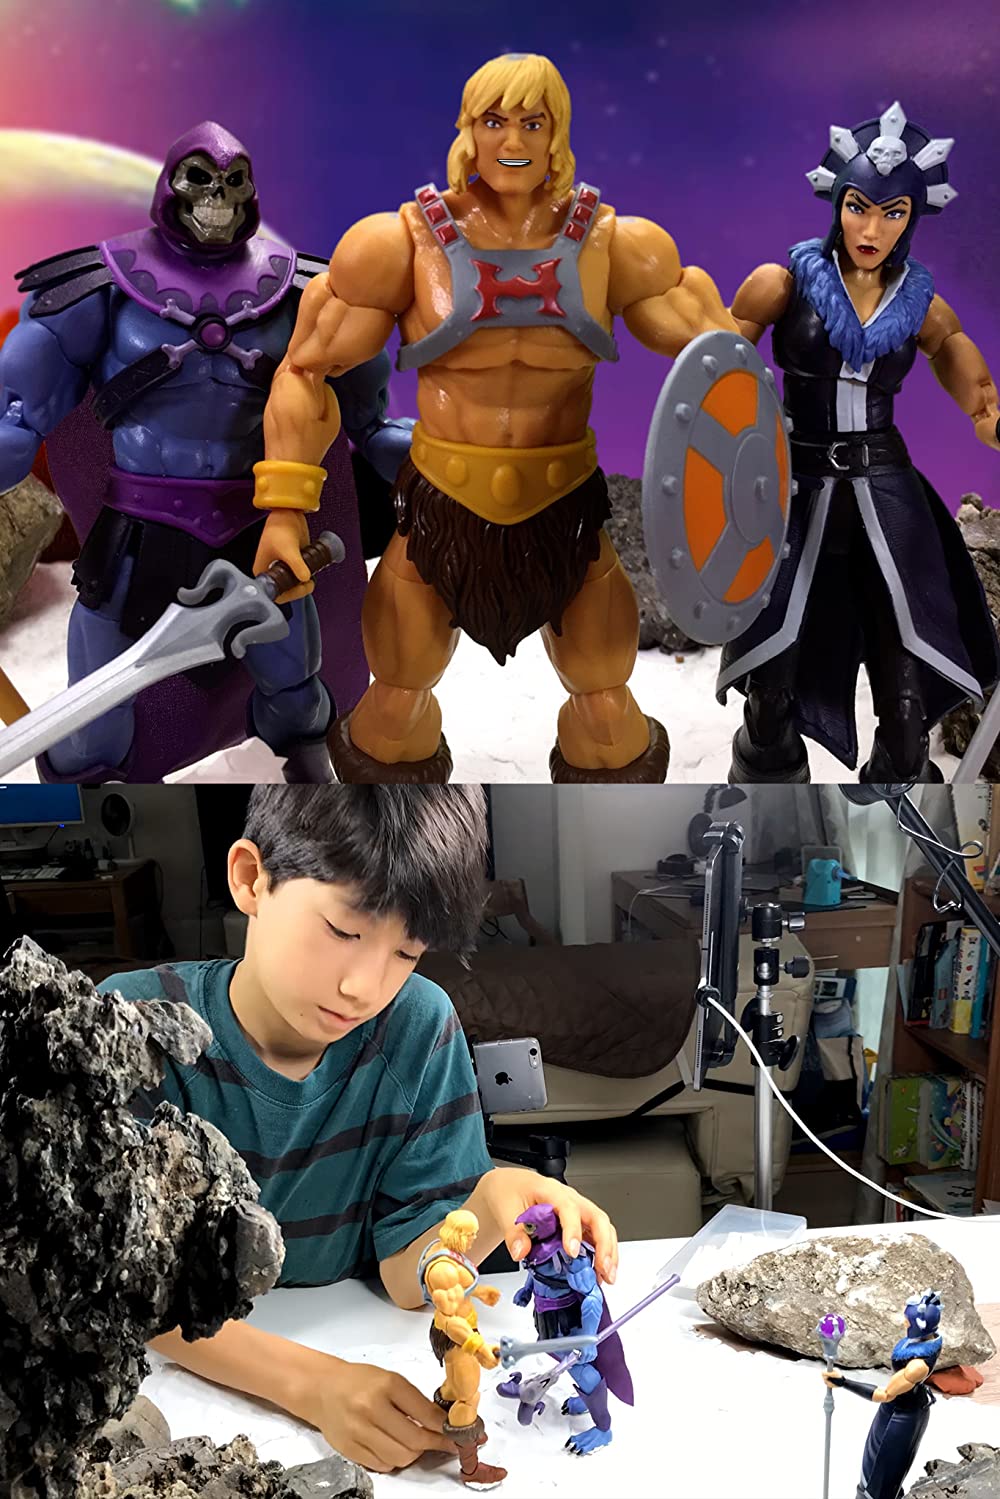 Stop-Motion Animation Workshop with He-Man and the Masters of the Universe